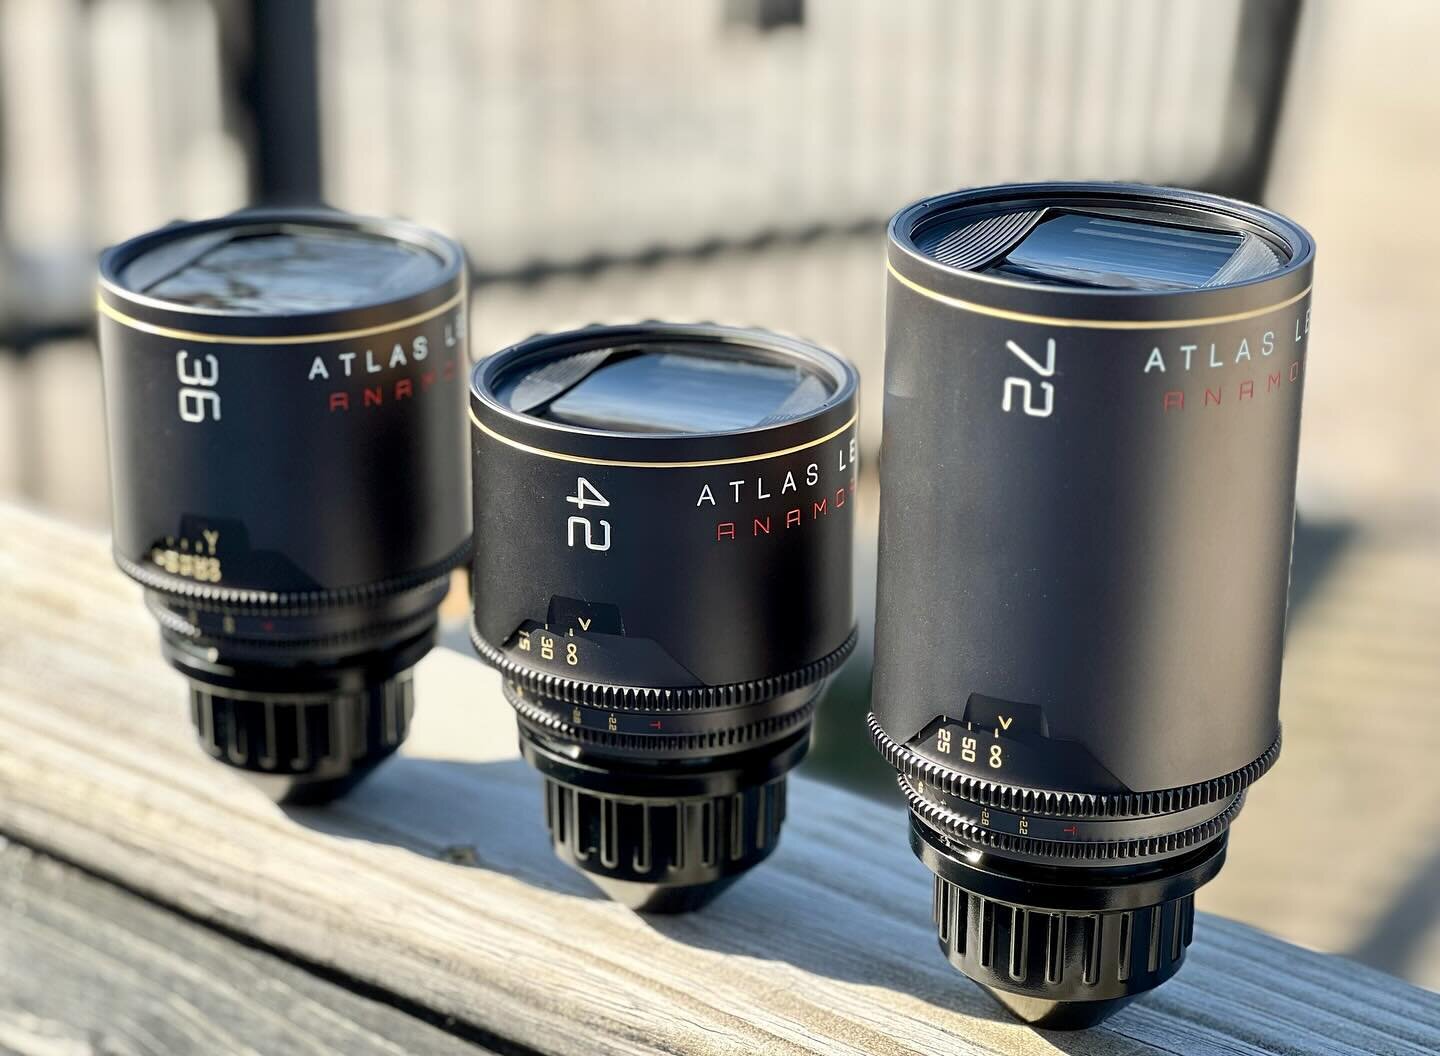 The Atlas Mercury 3 Lens Set is here, and avail for rental! The Mercury Series feature full-frame coverage, a 1.5x squeeze ratio with enhanced bokeh, and warm color tones. They are smaller and lighter than either the Kowa or Xelmus anas. The initial 